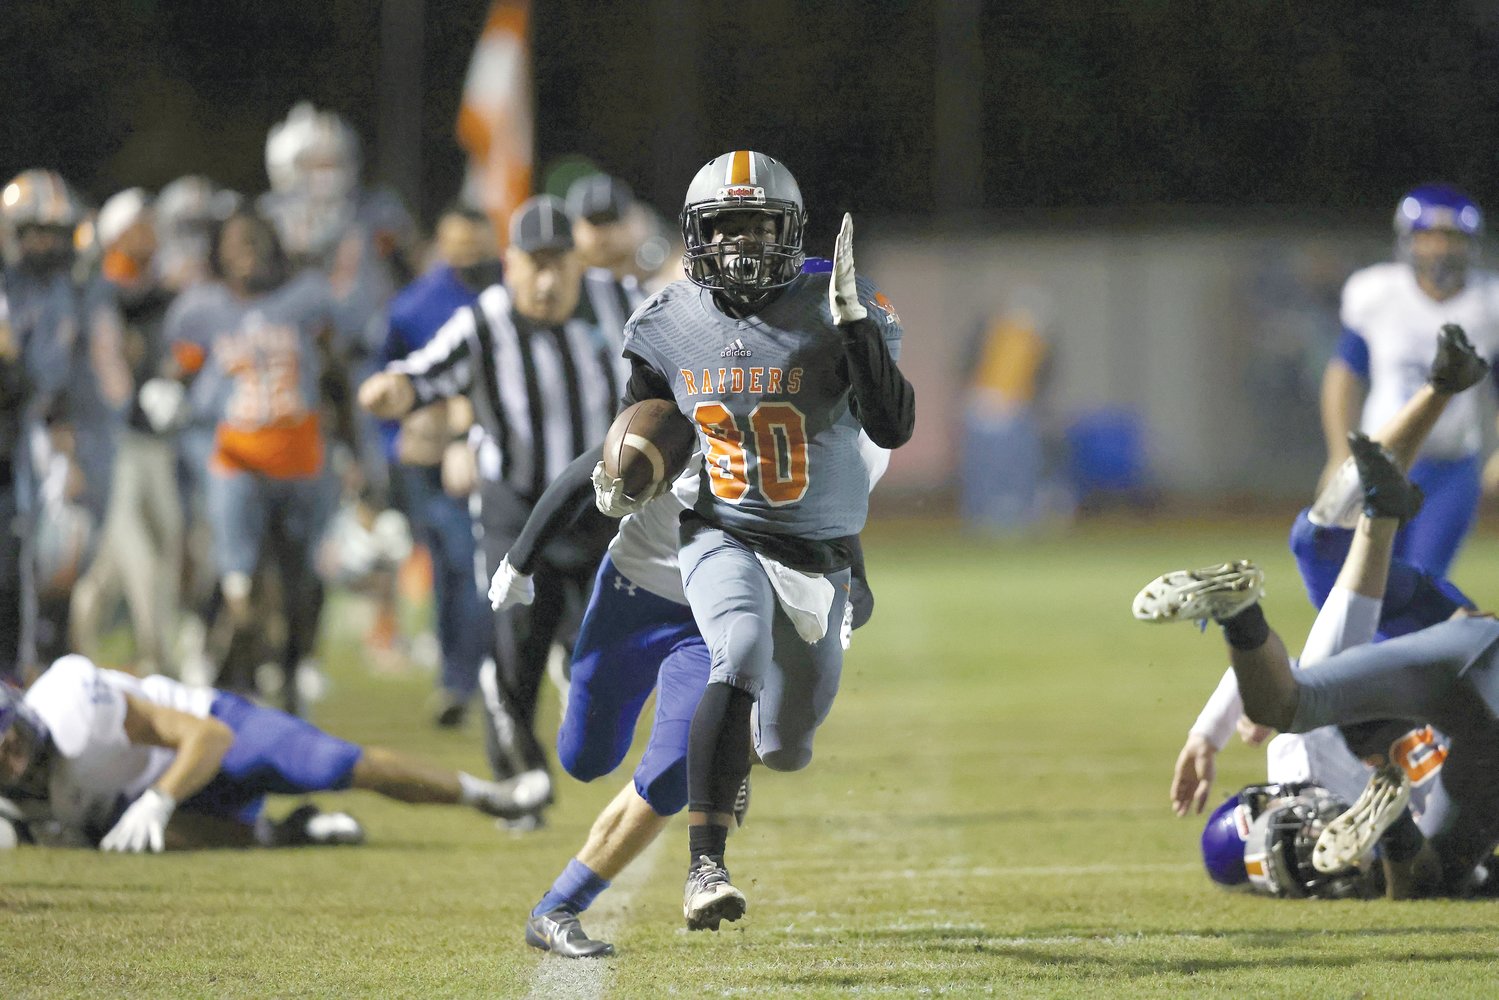 The Pedro Menendez Falcons defeated the Orange Park Raiders 41-24 in a high school football playoff game at Orange Park high school in Orange Park, Florida on Friday, November 20, 2020. (Copyright 2020 James Gilbert Photo)